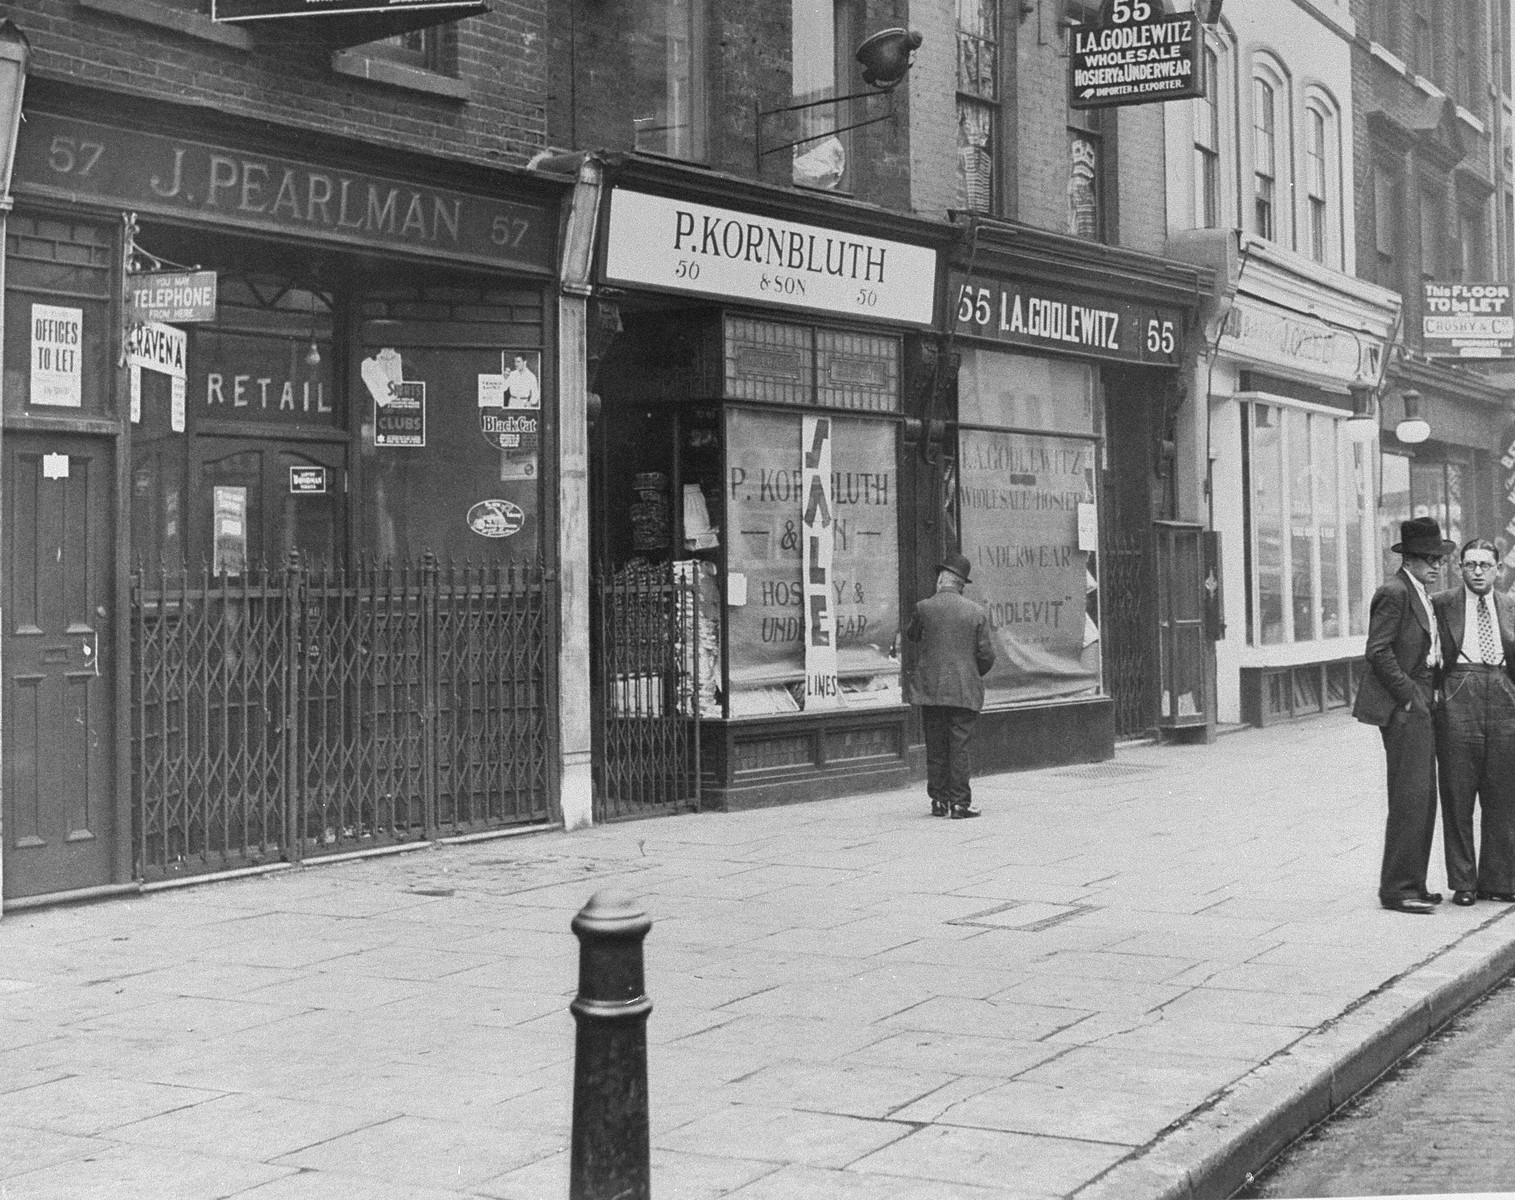 View of a street in Whitechapel where all the Jewish businesses remain closed to protest against the Nazi persecution of German Jewry.